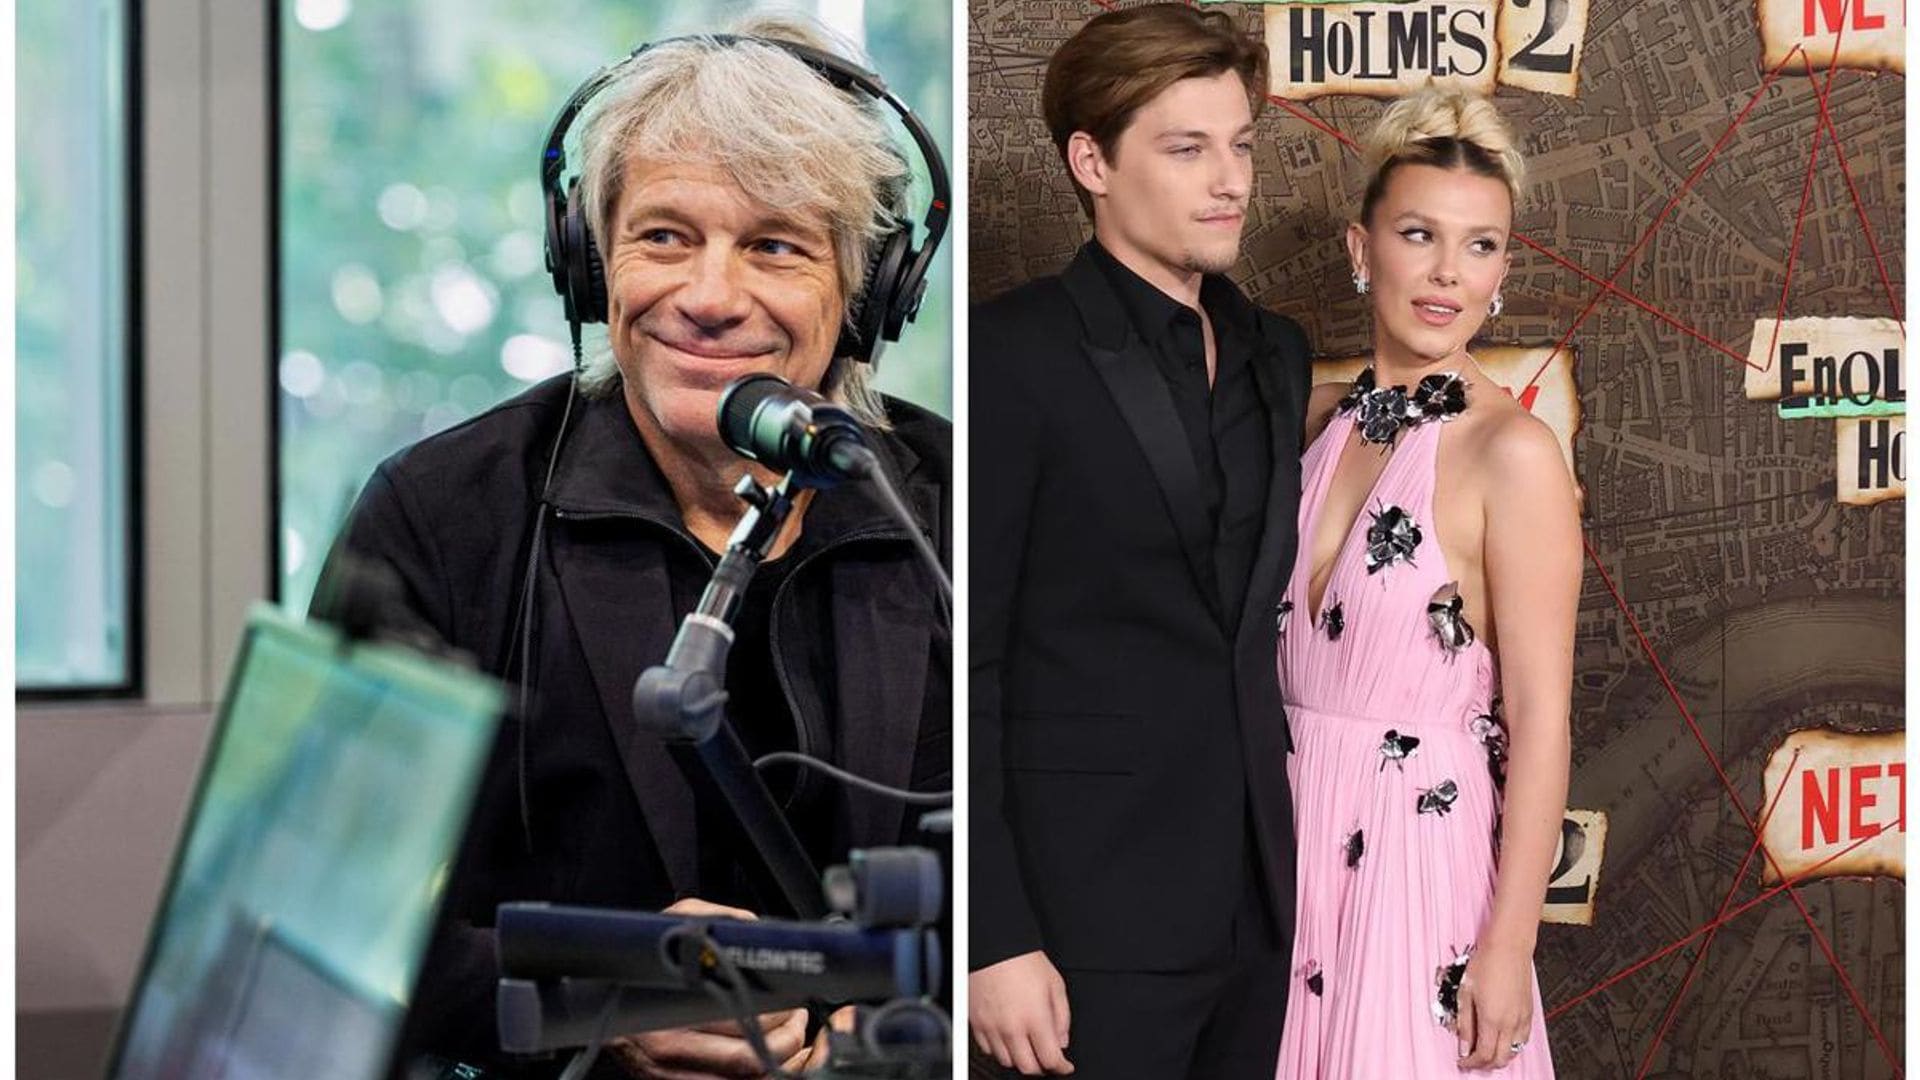 Jon Bon Jovi on son’s engagement to Millie Bobby Brown: ‘I don’t know if age matters’